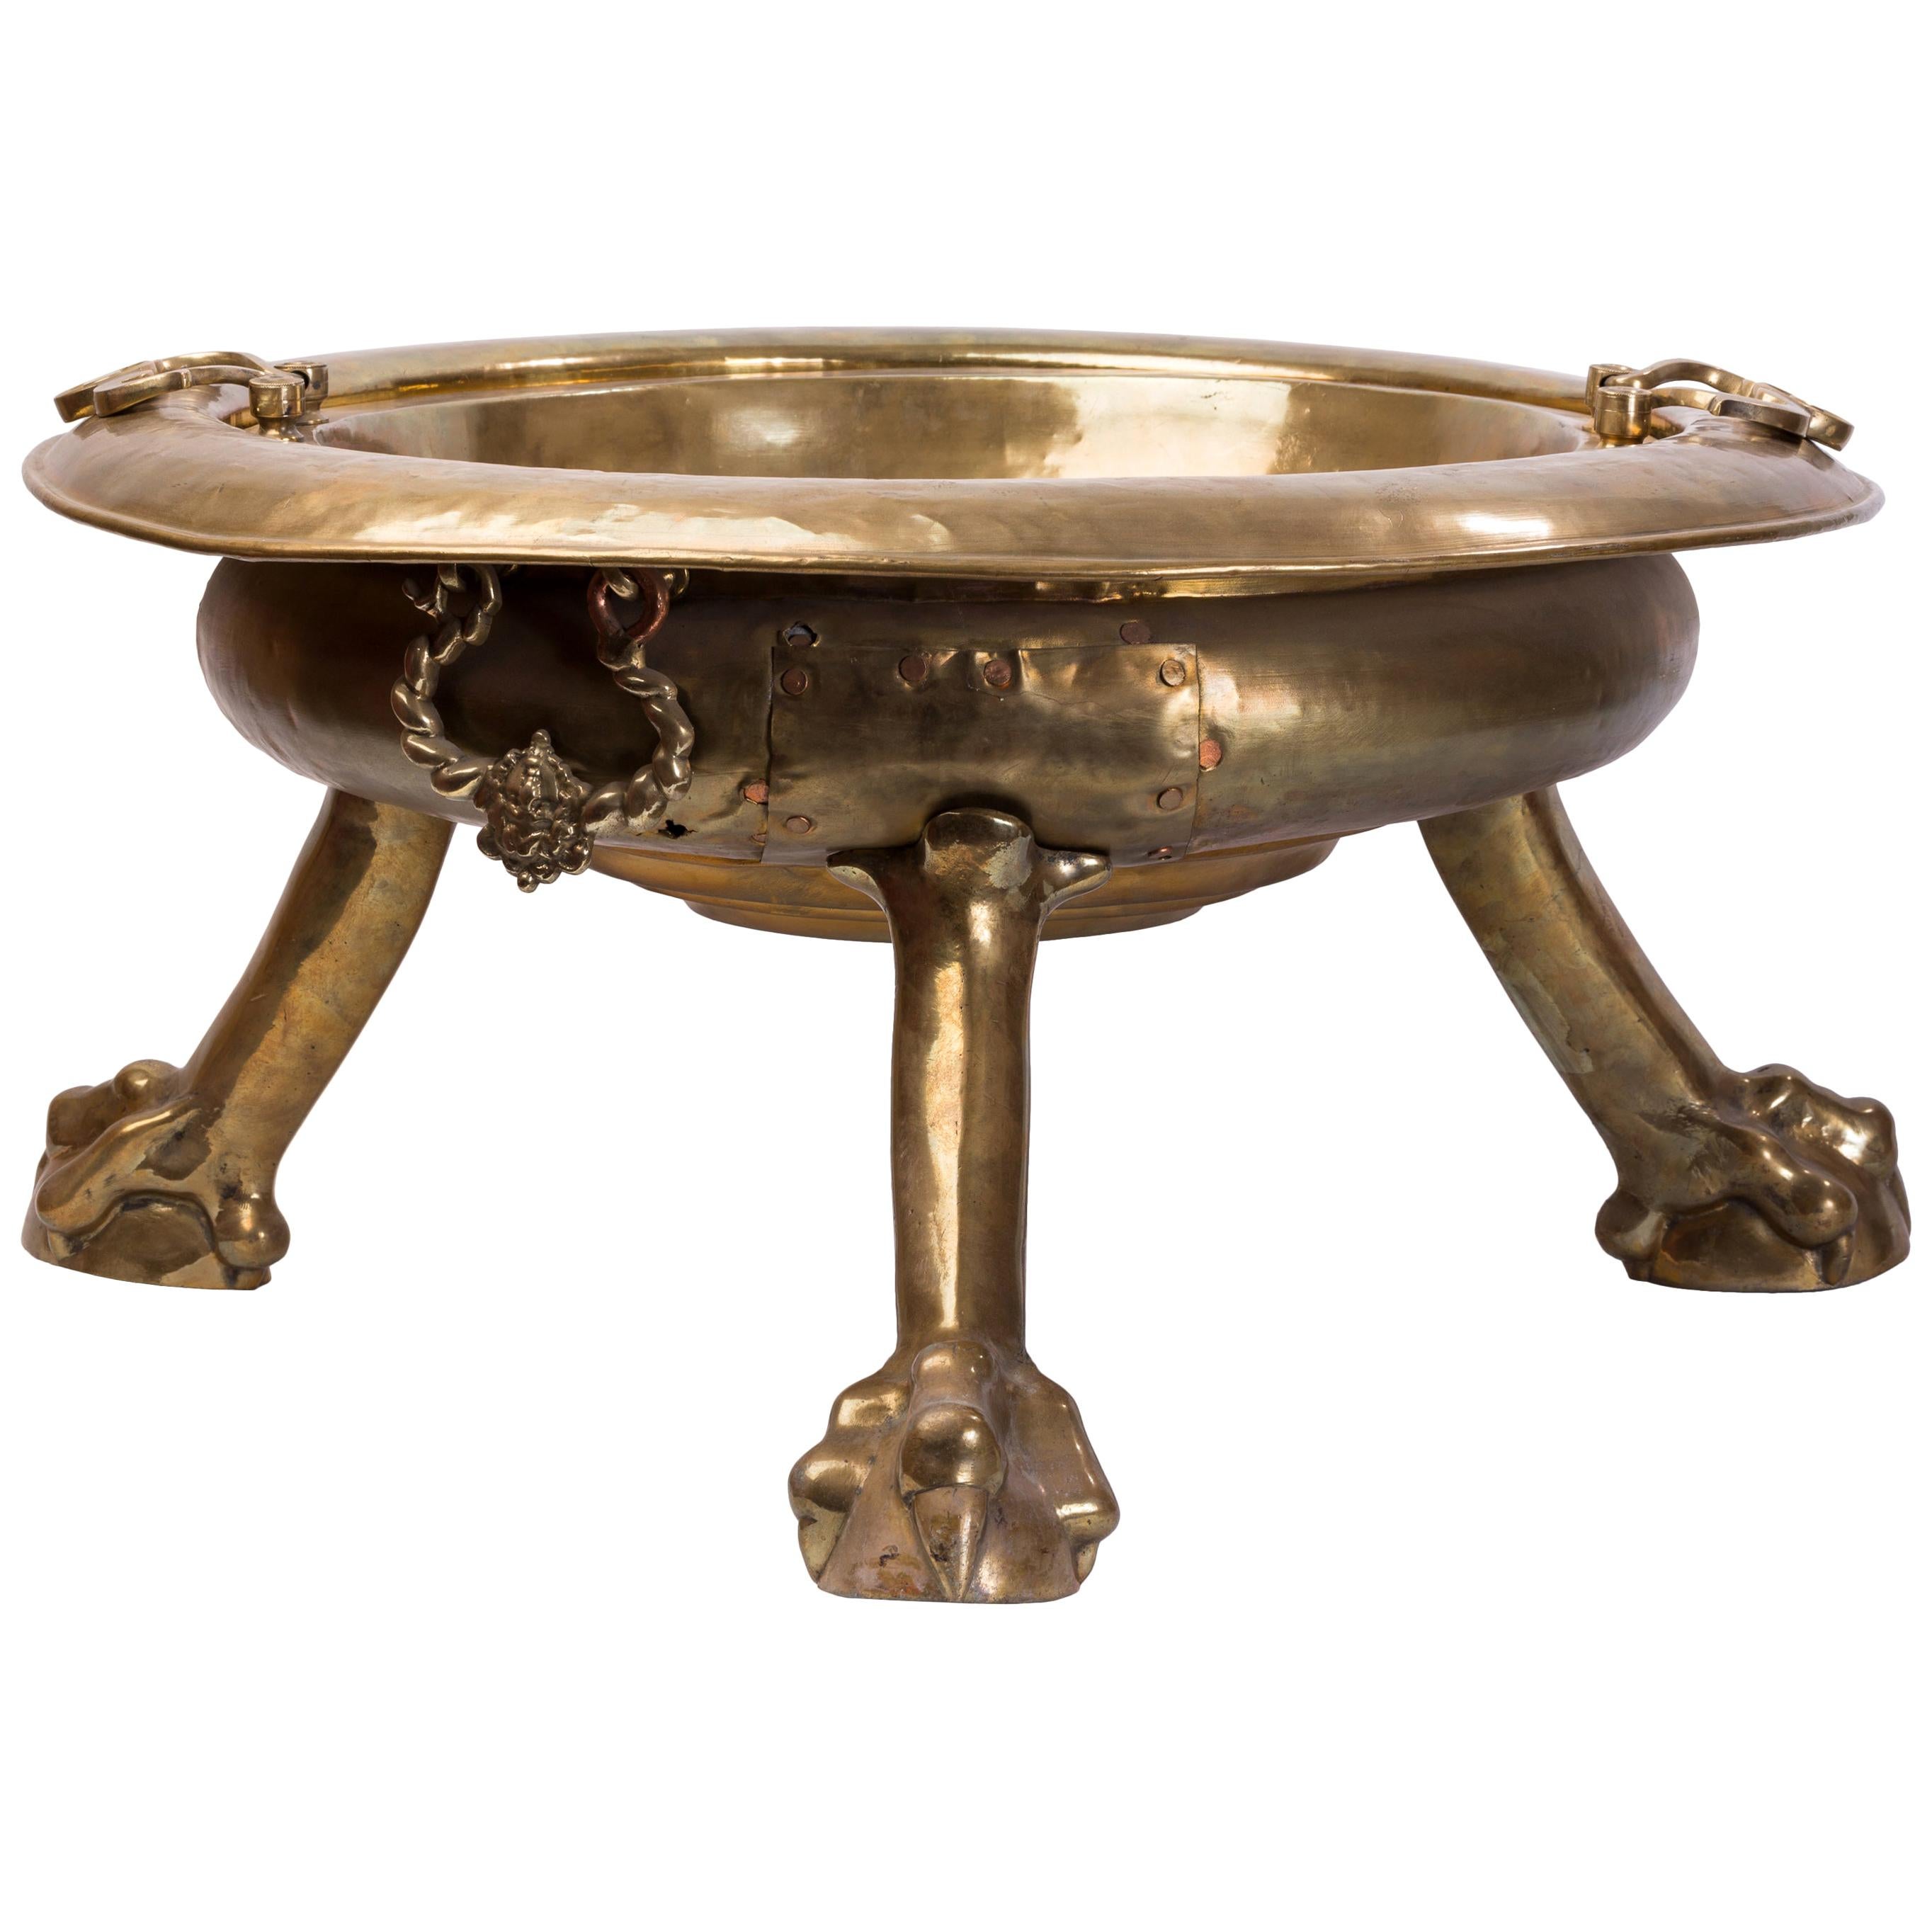 19th Century Spanish Brass Ball and Claw Foot Brazier / Planter For Sale